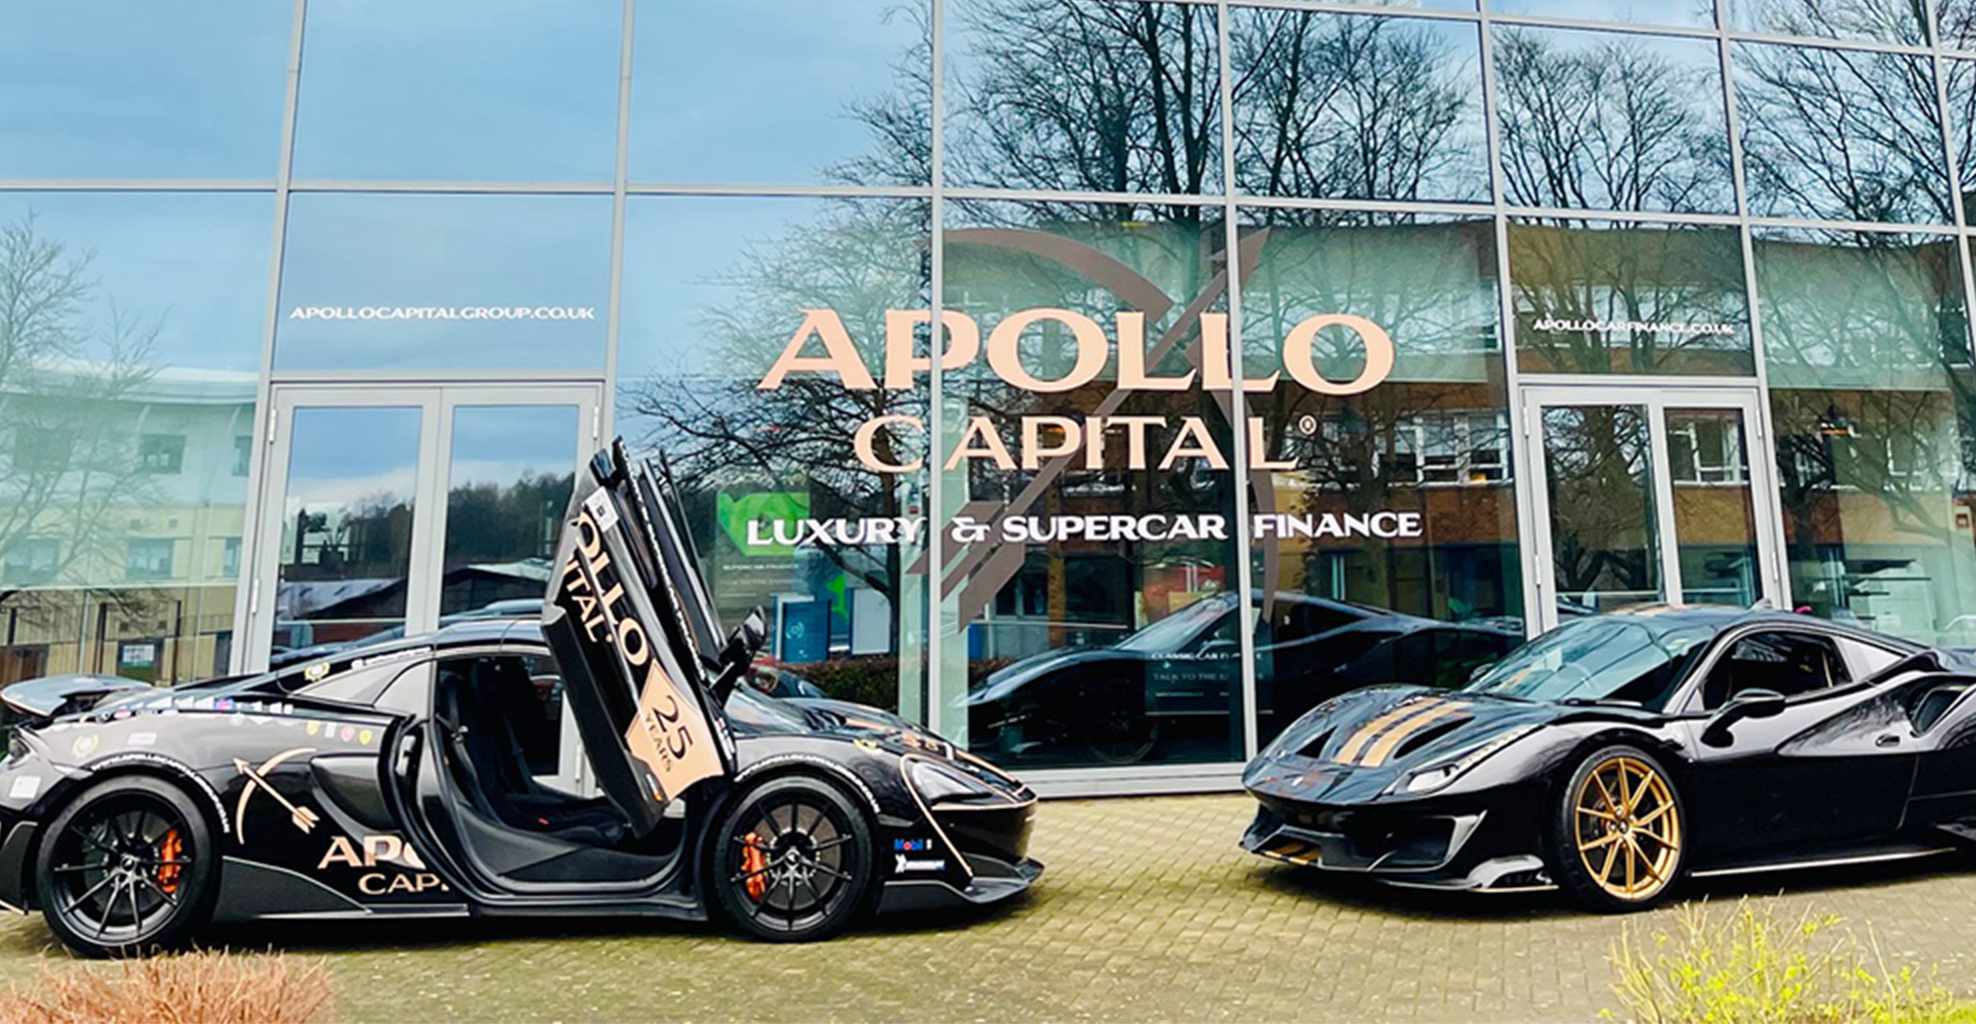 Some of the world’s most powerful and thrilling supercars are expected in Harrogate this weekend as leading luxury car financier Apollo Capital hosts its very first client and supercar club open day